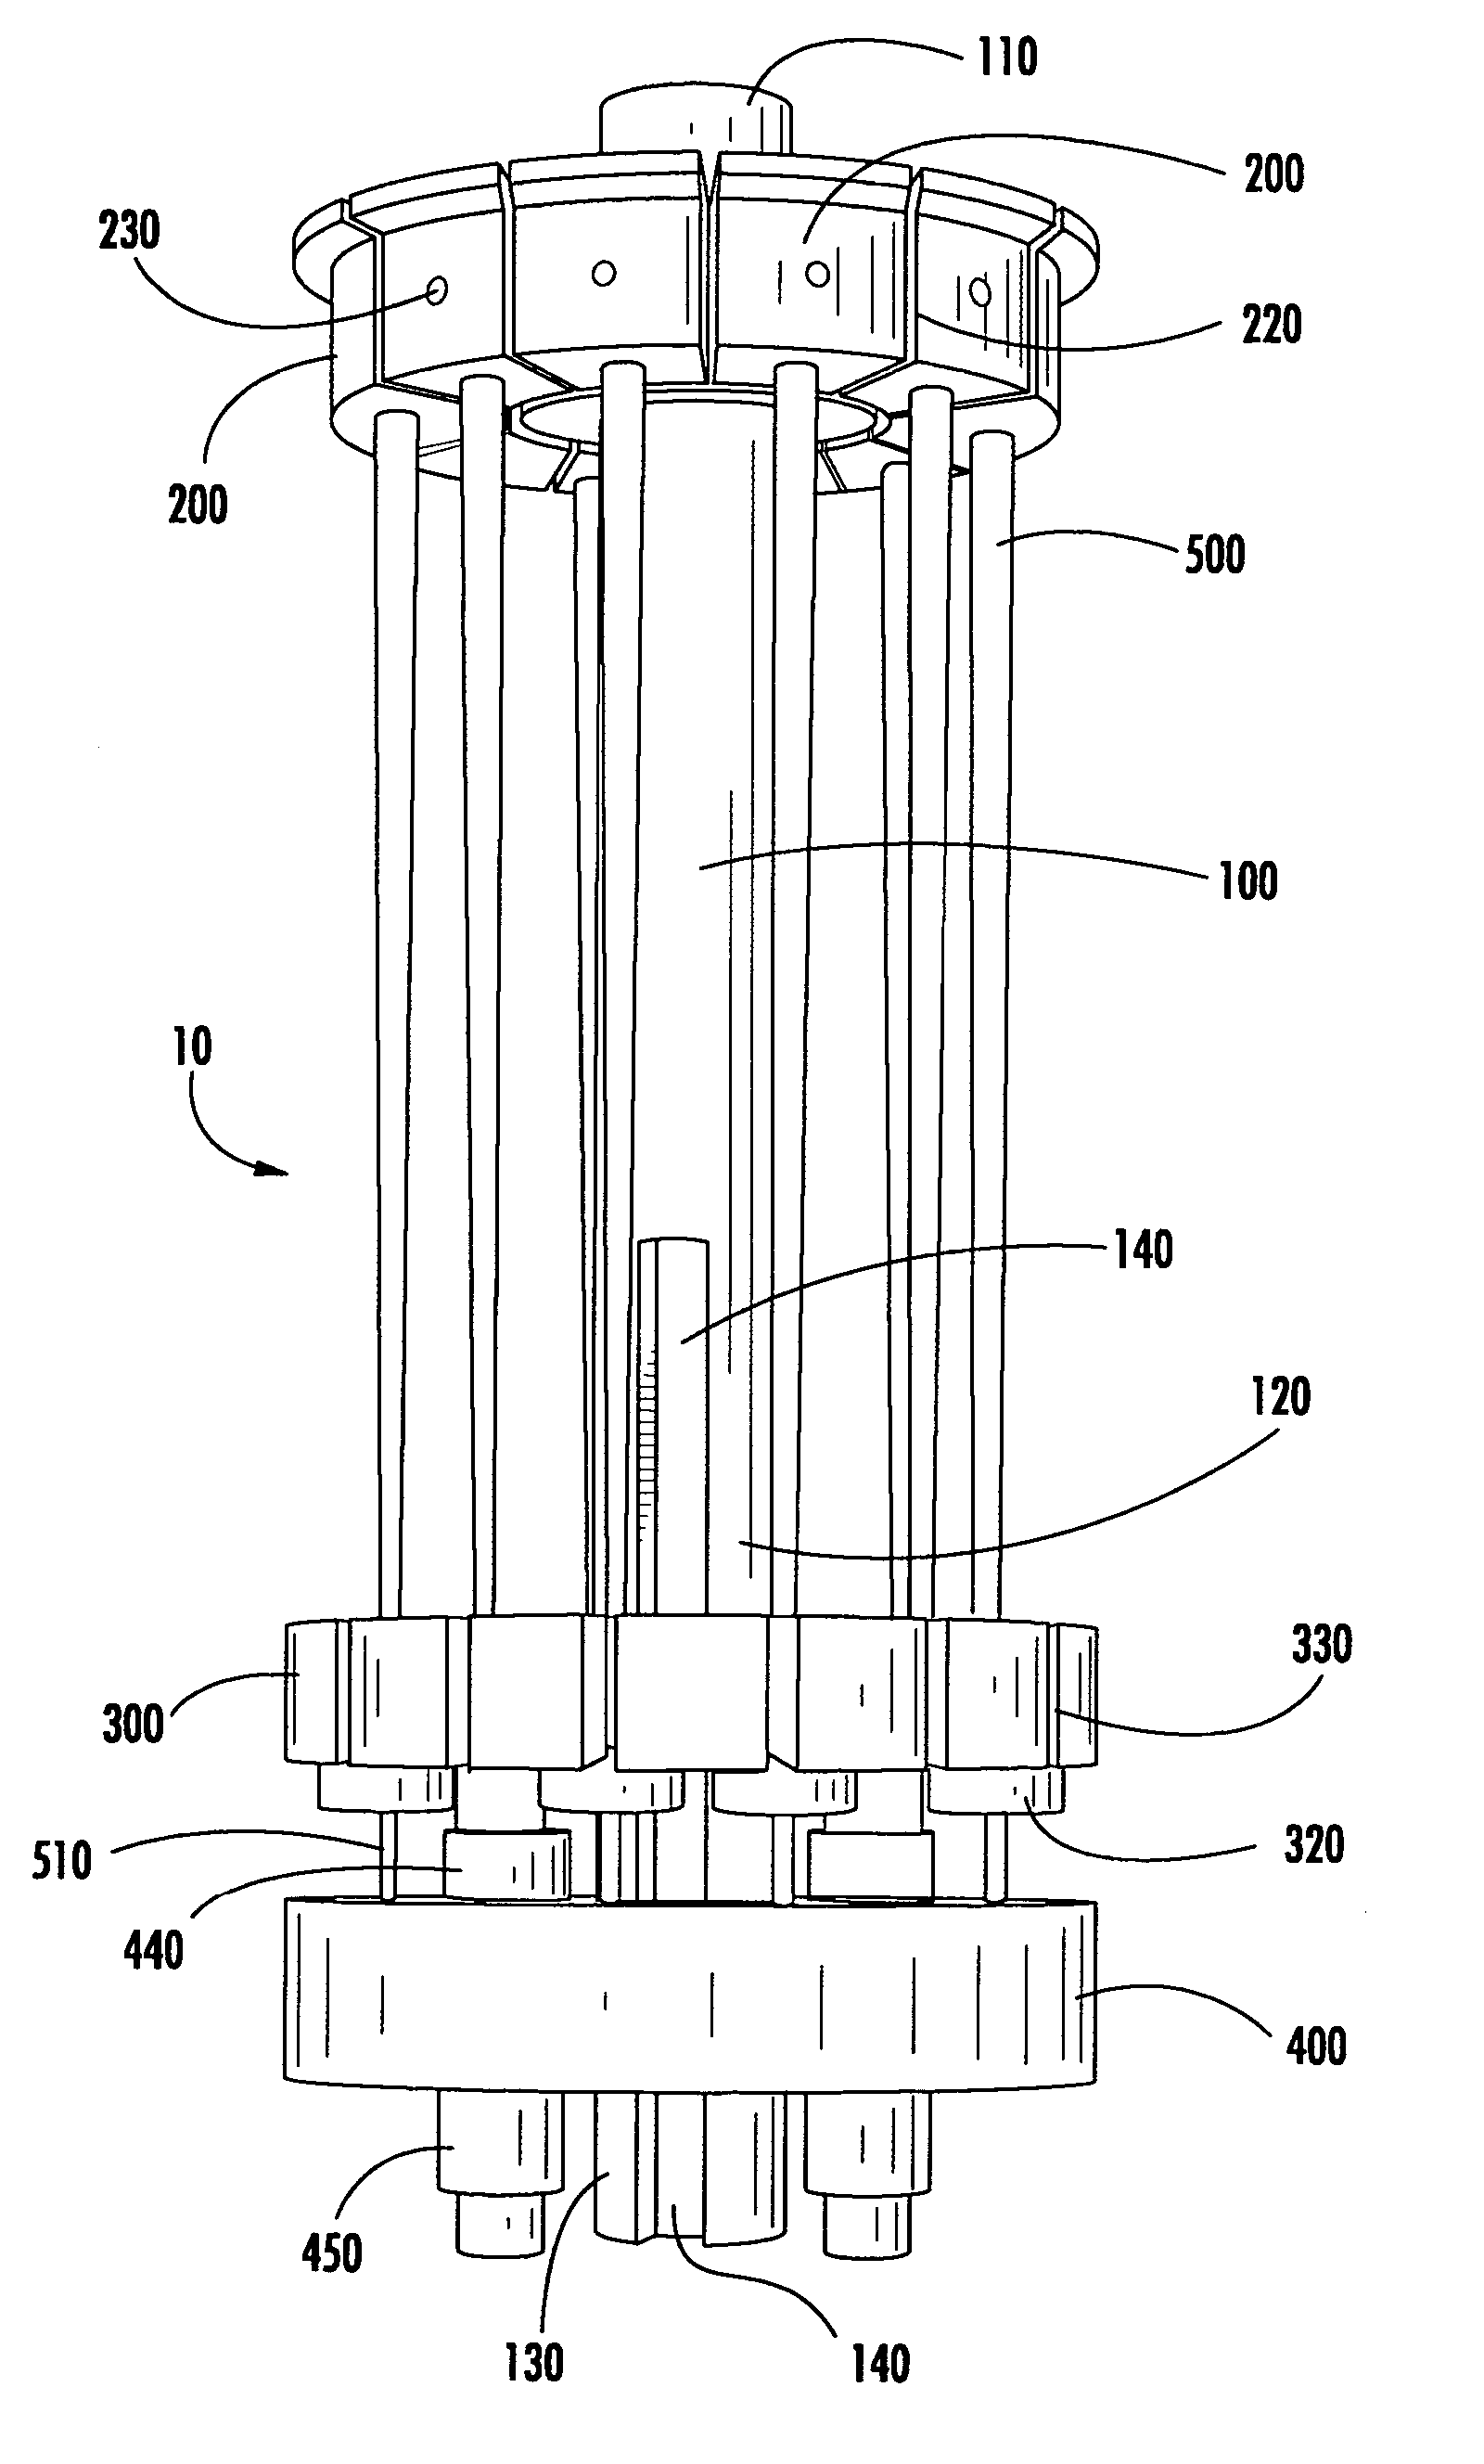 Crystallization cassette for the growth and analysis of macromolecular crystals and an associated method